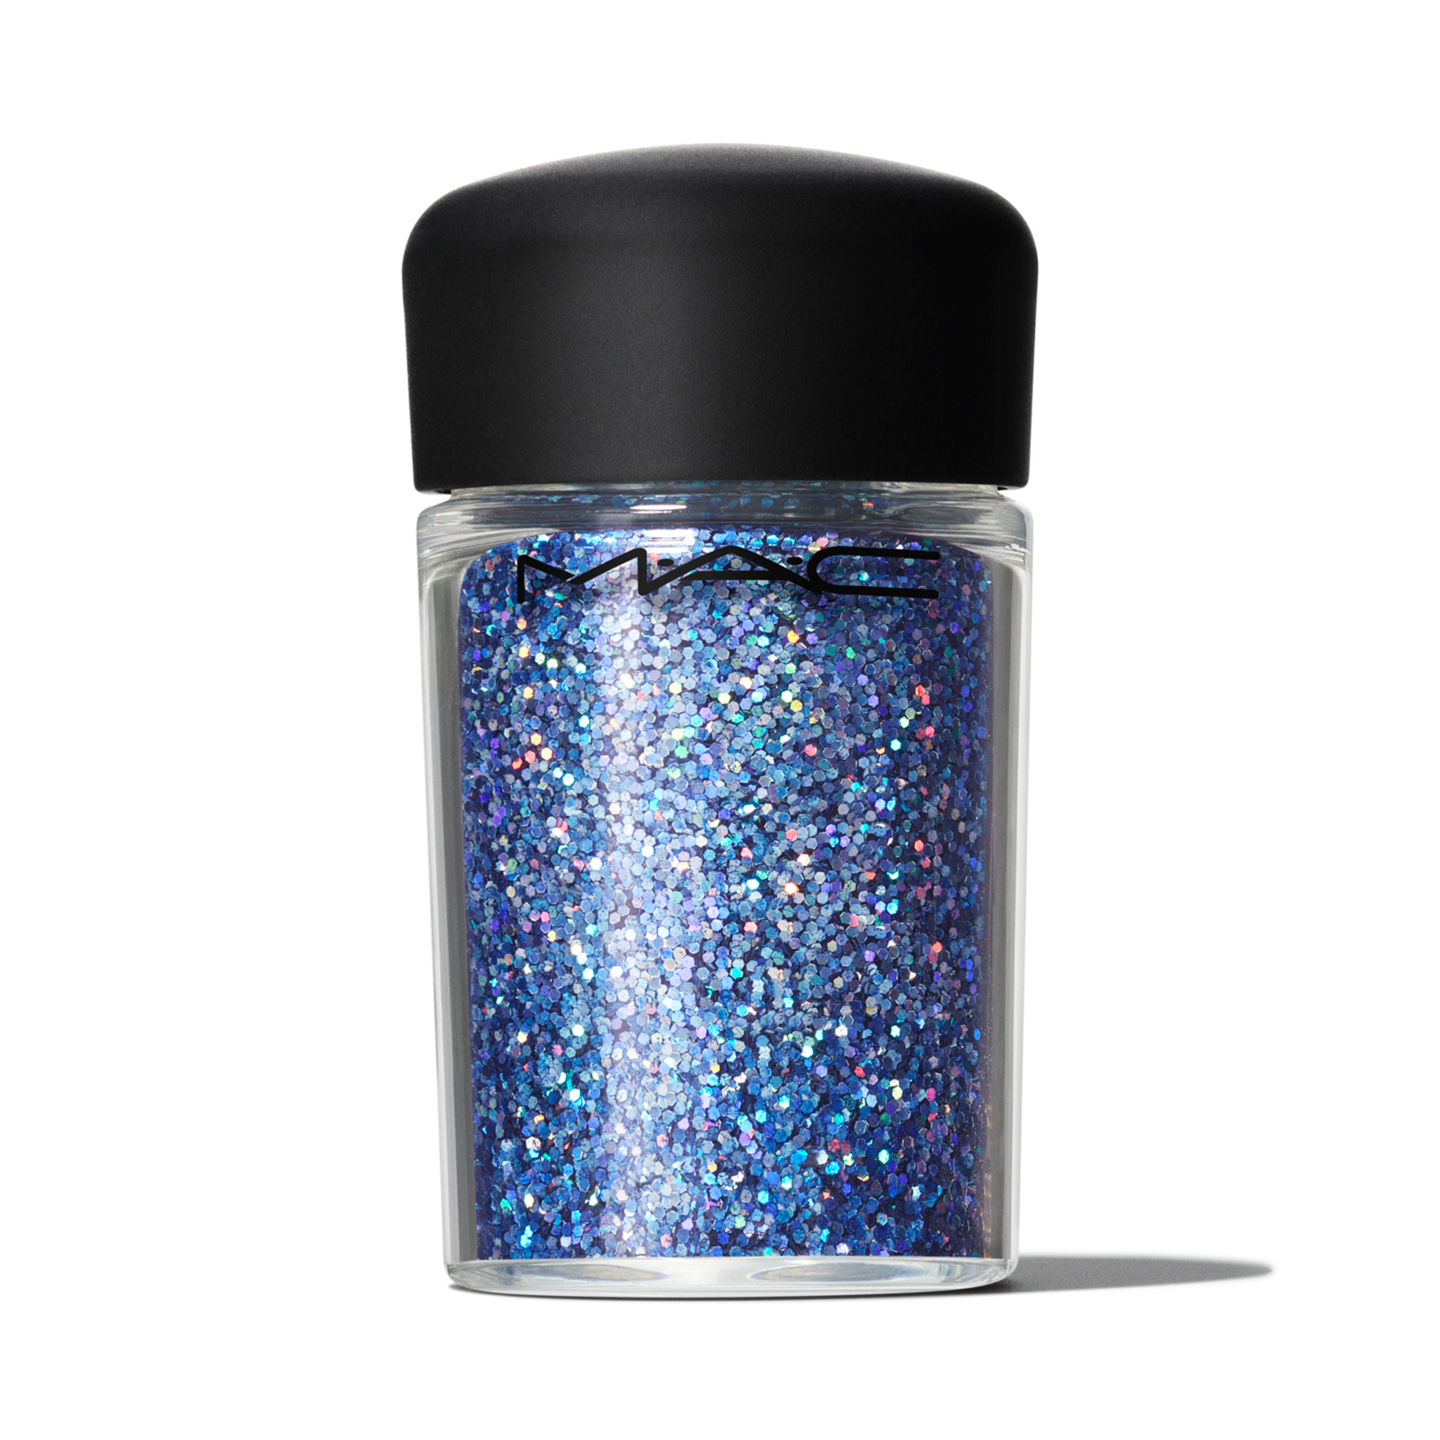 Holographic Silver Stars Biodegradable Glitter  Cosmetic Grade Glitte –  Glittery - Your #1 source for all kinds of glitter products!